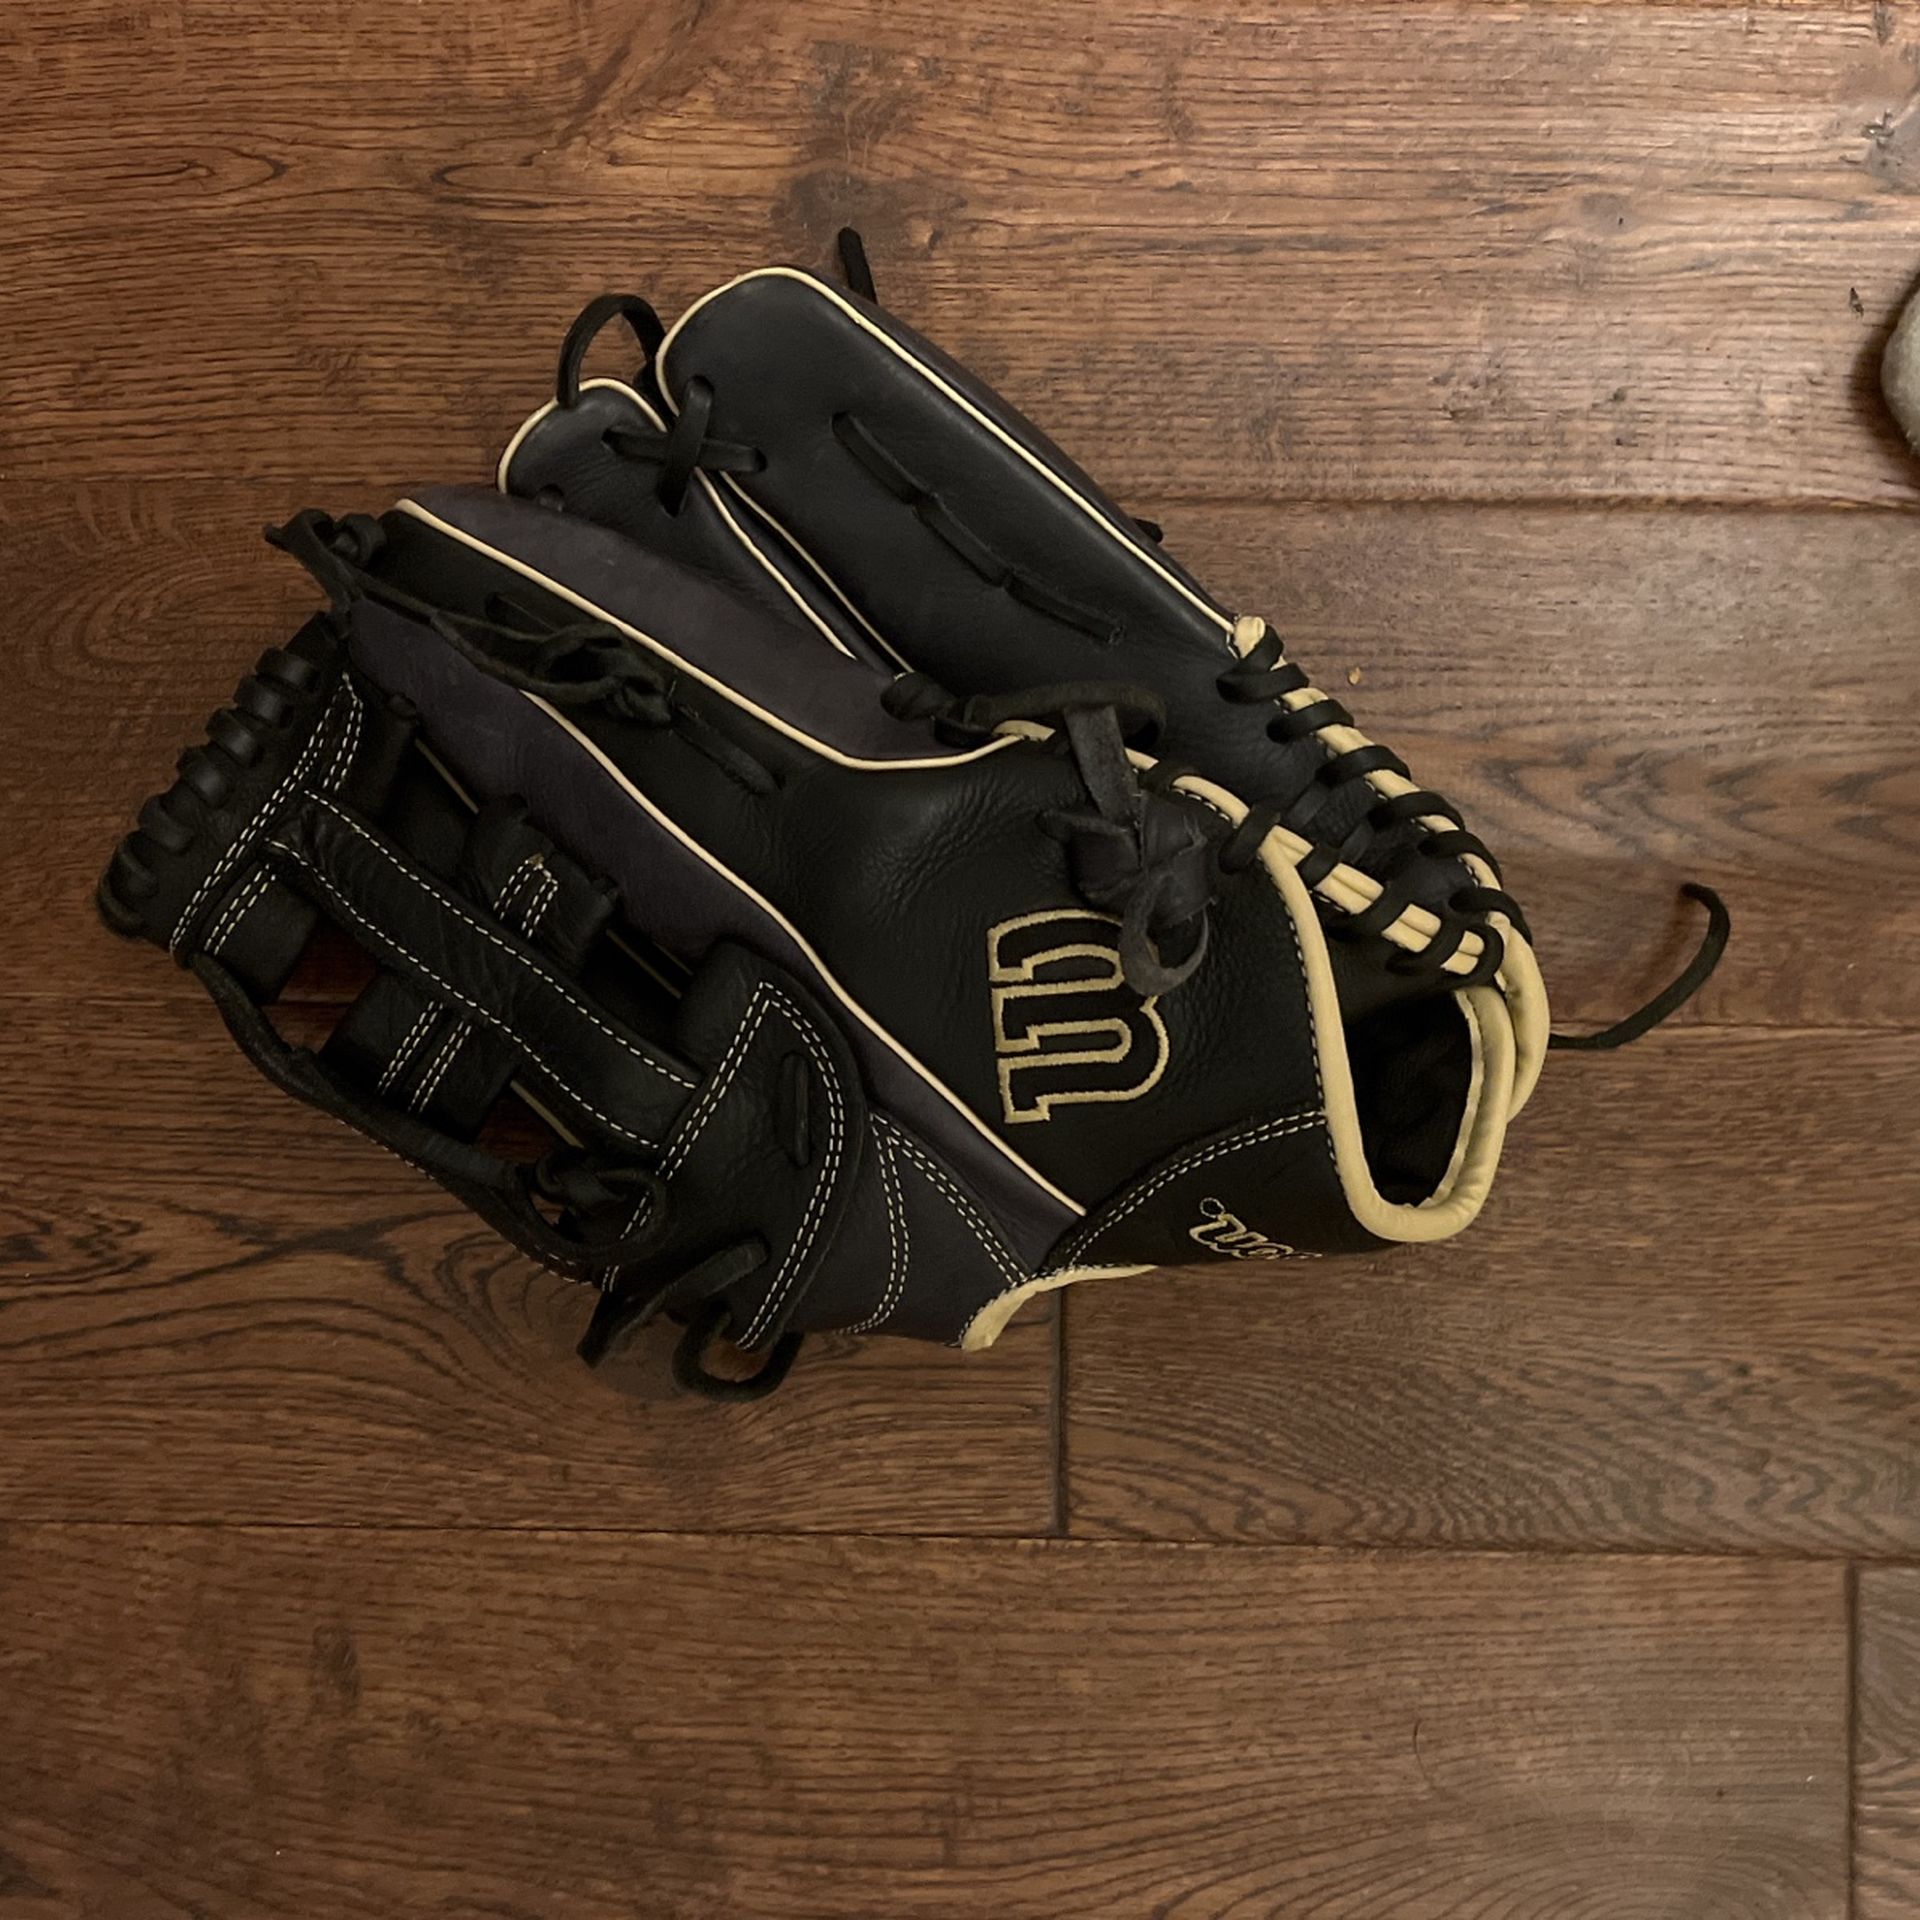 Wilson A1000 outfildiers glove